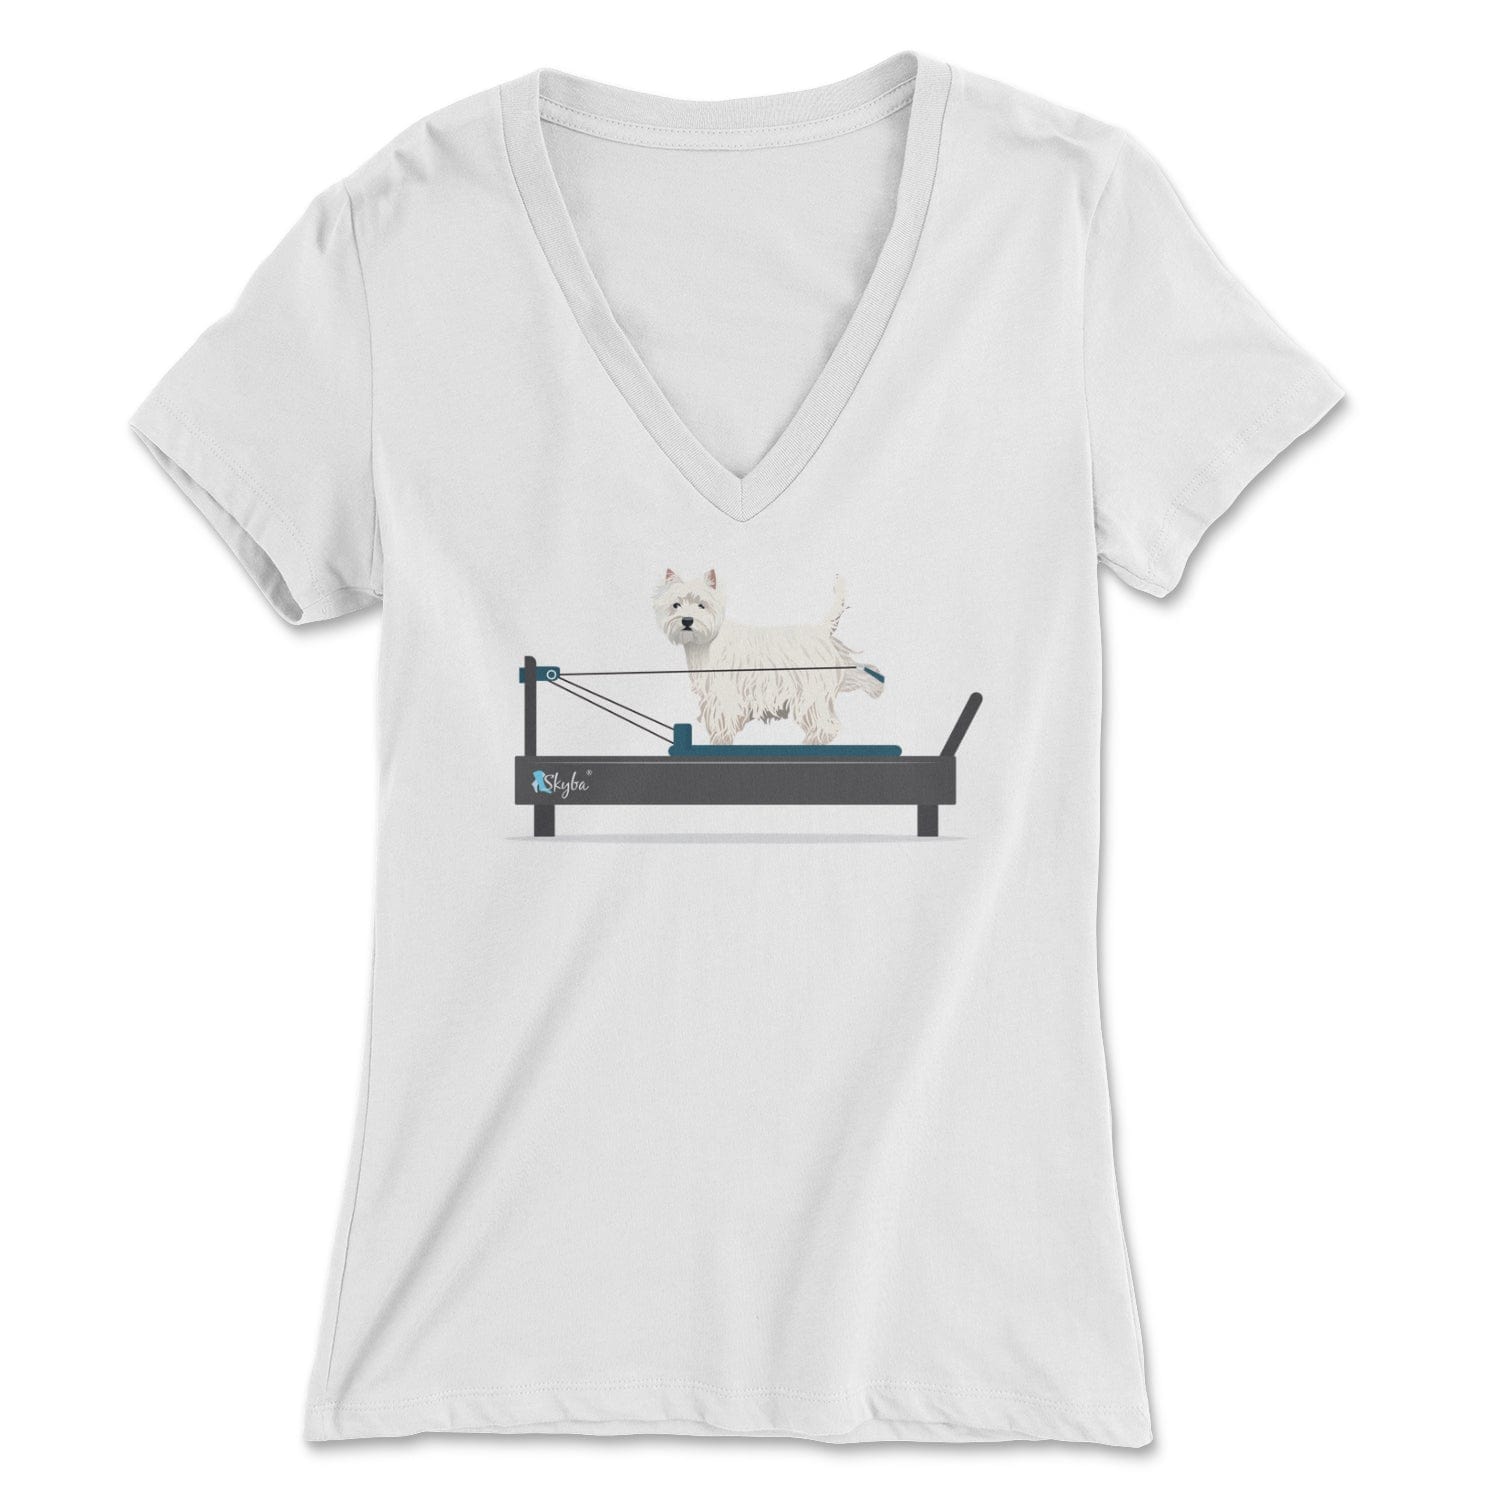 Westie on the Reformer - Women's V-Neck Tee Skyba Print Material